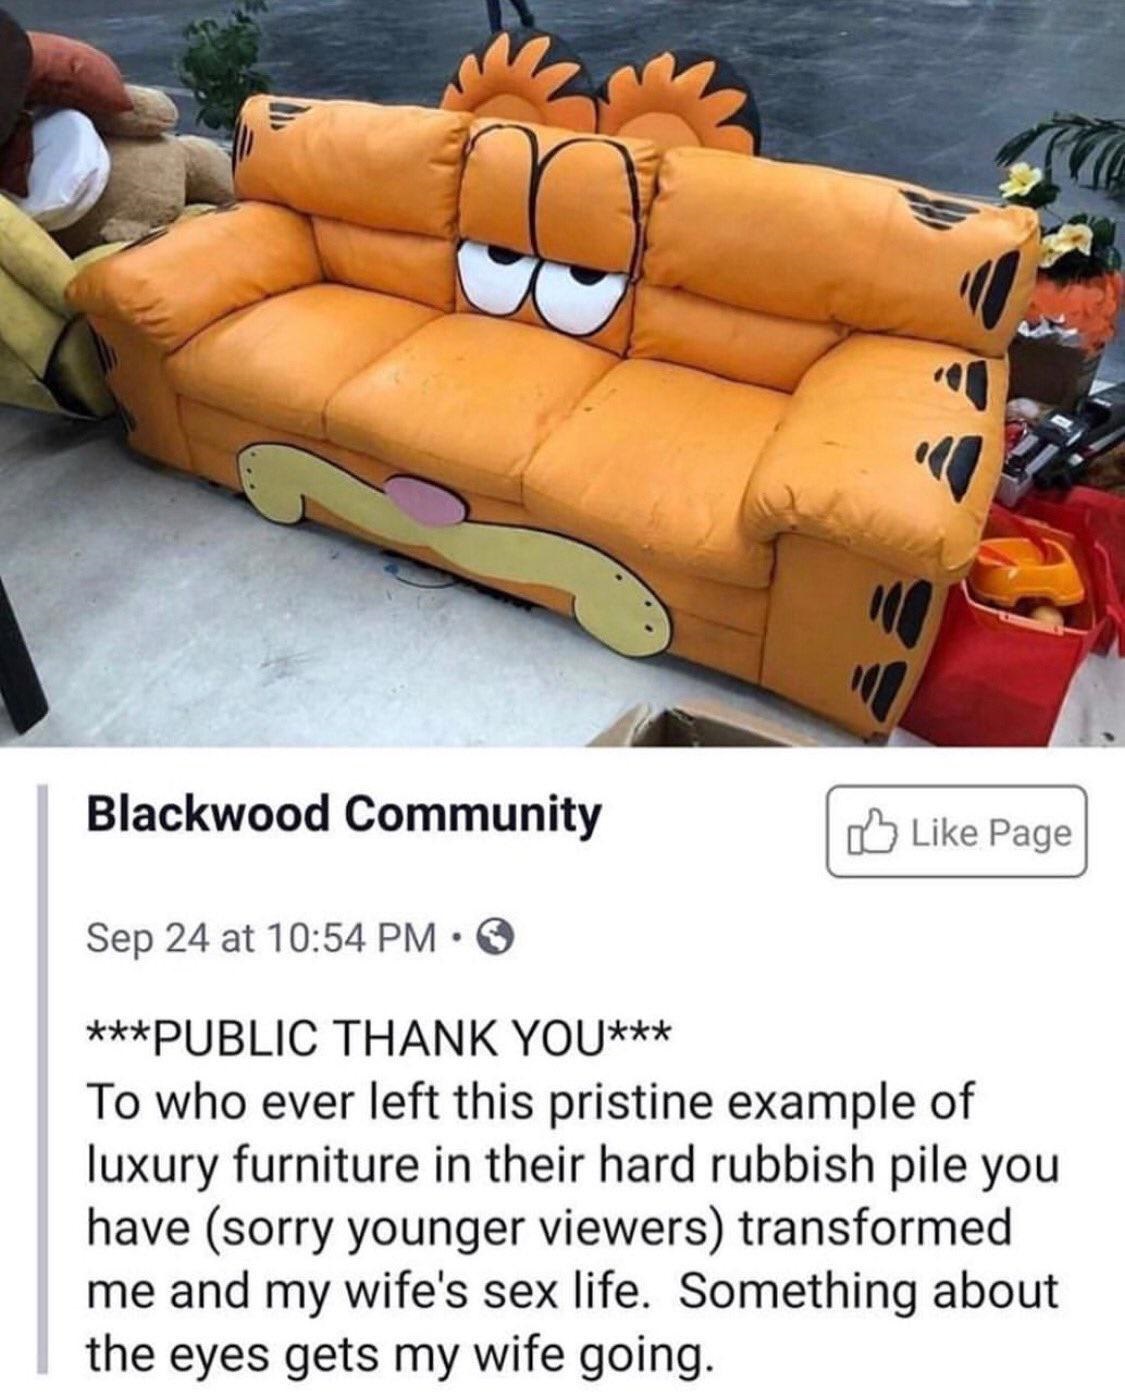 garfield couch meme - Blackwood Community Page Sep 24 at Public Thank You To who ever left this pristine example of luxury furniture in their hard rubbish pile you have sorry younger viewers transformed me and my wife's sex life. Something about the eyes 